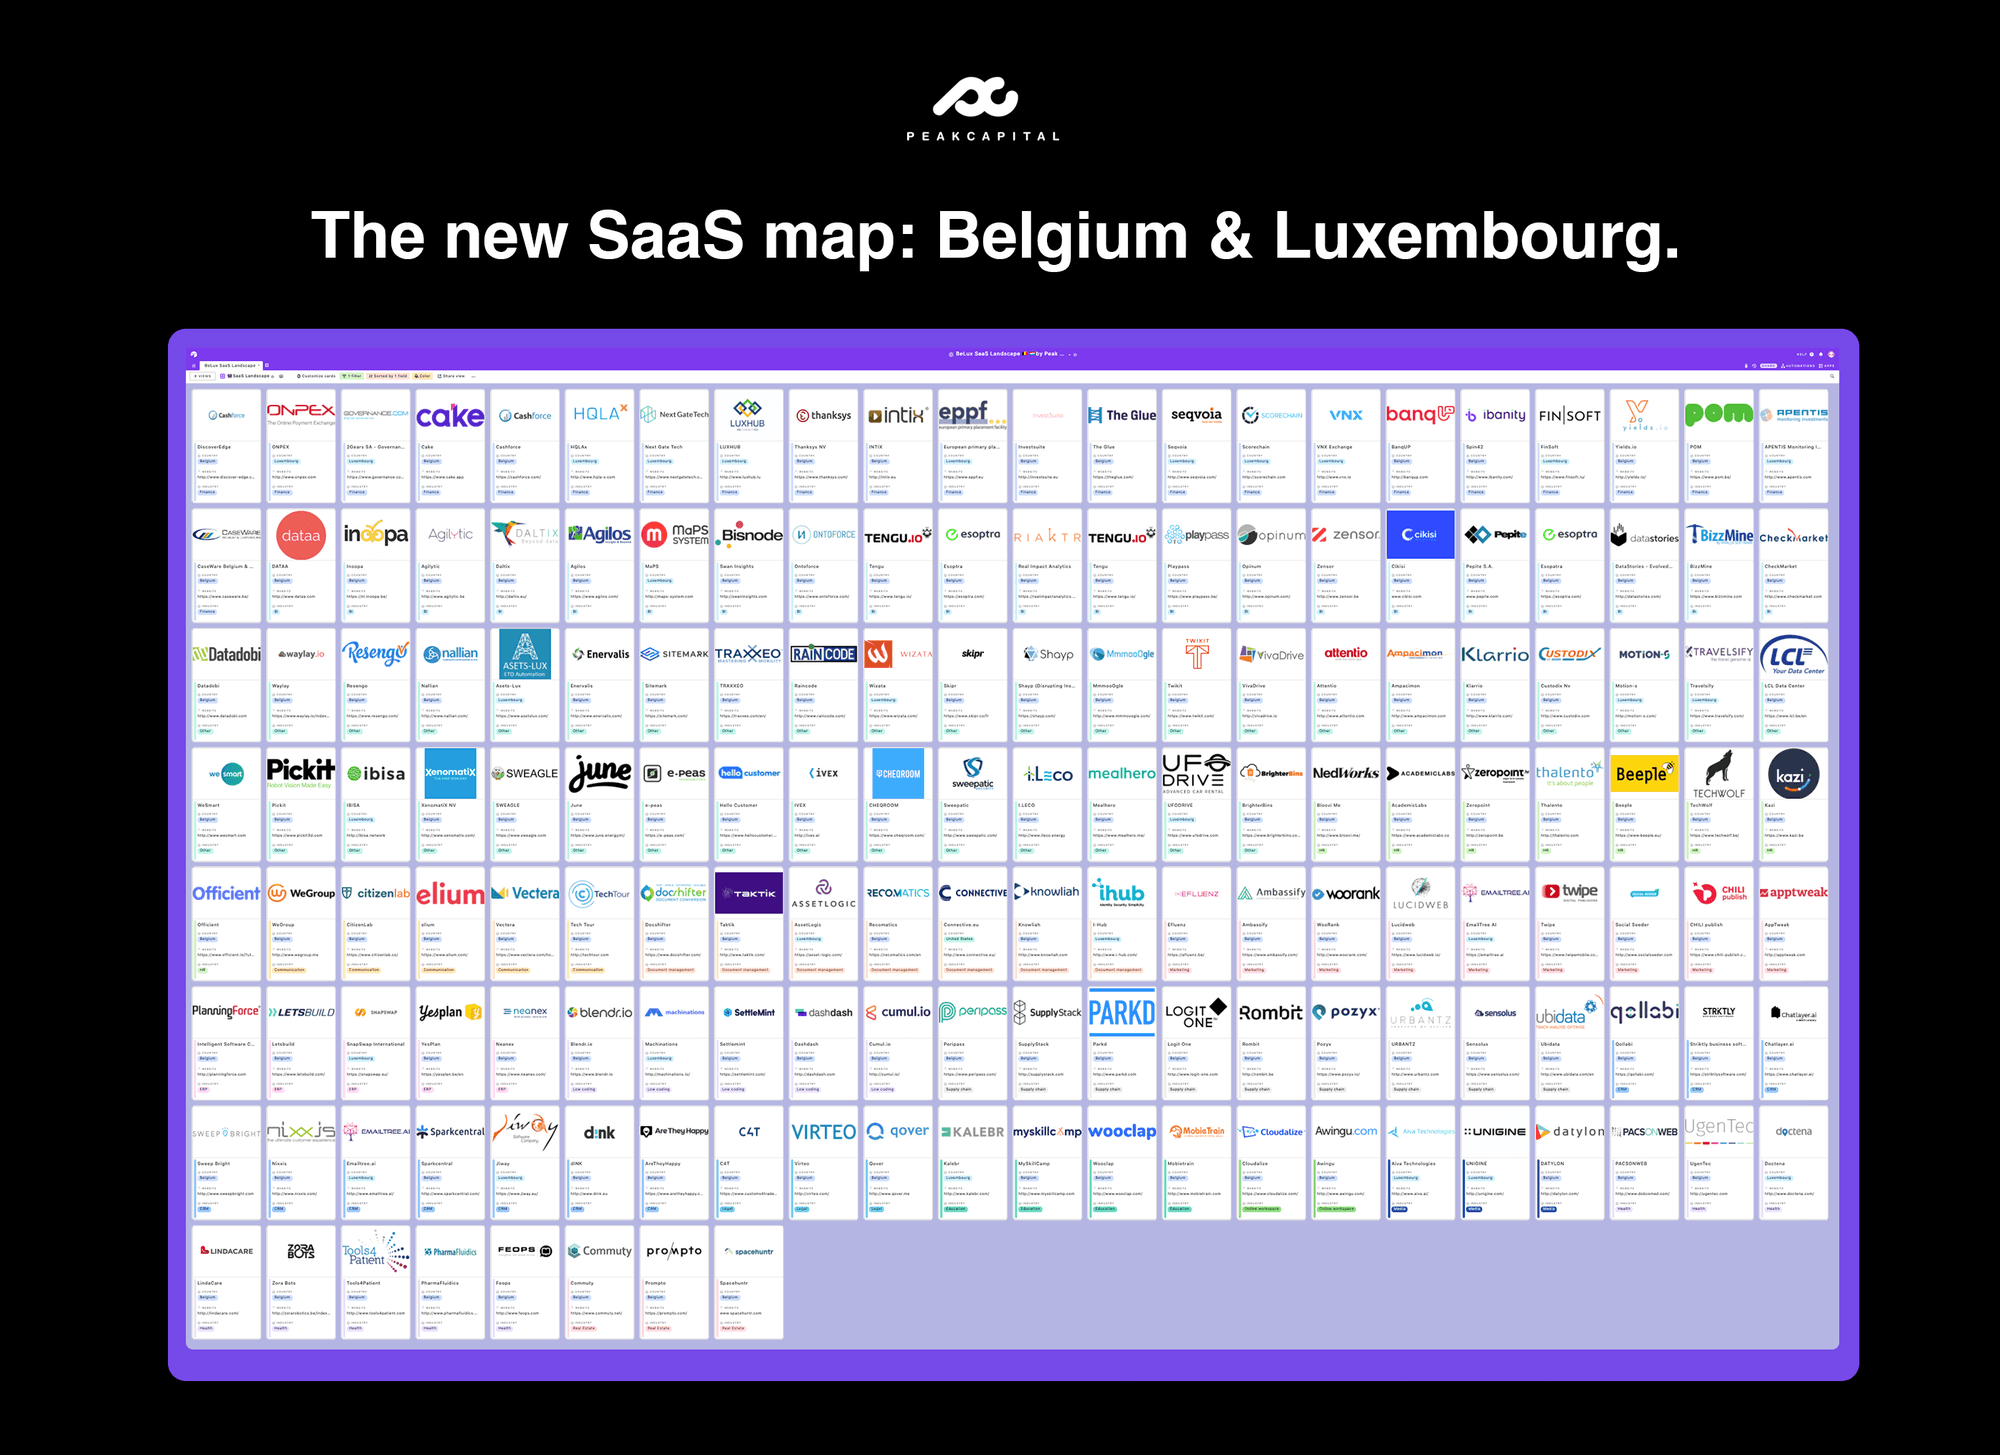 SaaS in the BeLux: A Dynamic Market Map For Belgium and Luxembourg